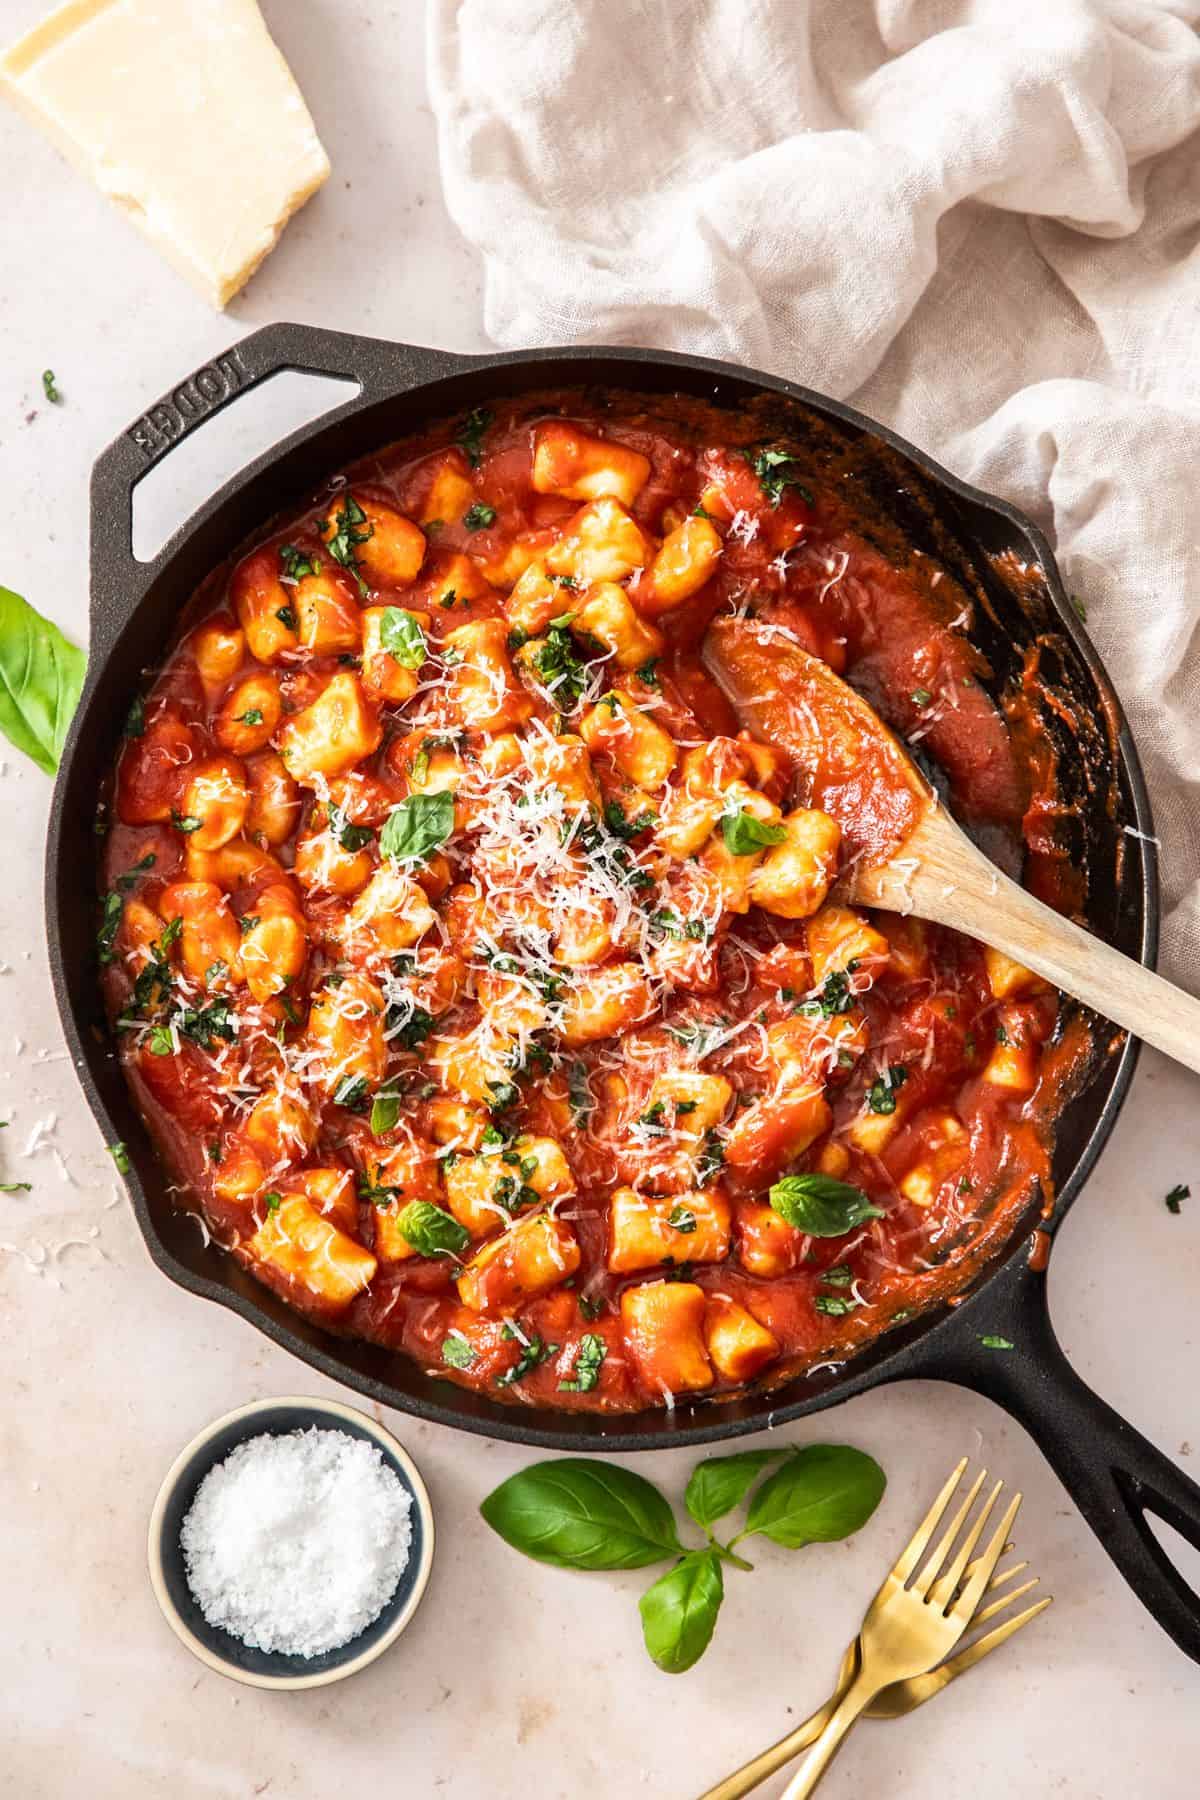 Skillet with the cooked gnocchi in a tomato sauce, ready to be served with a wooden spoon.